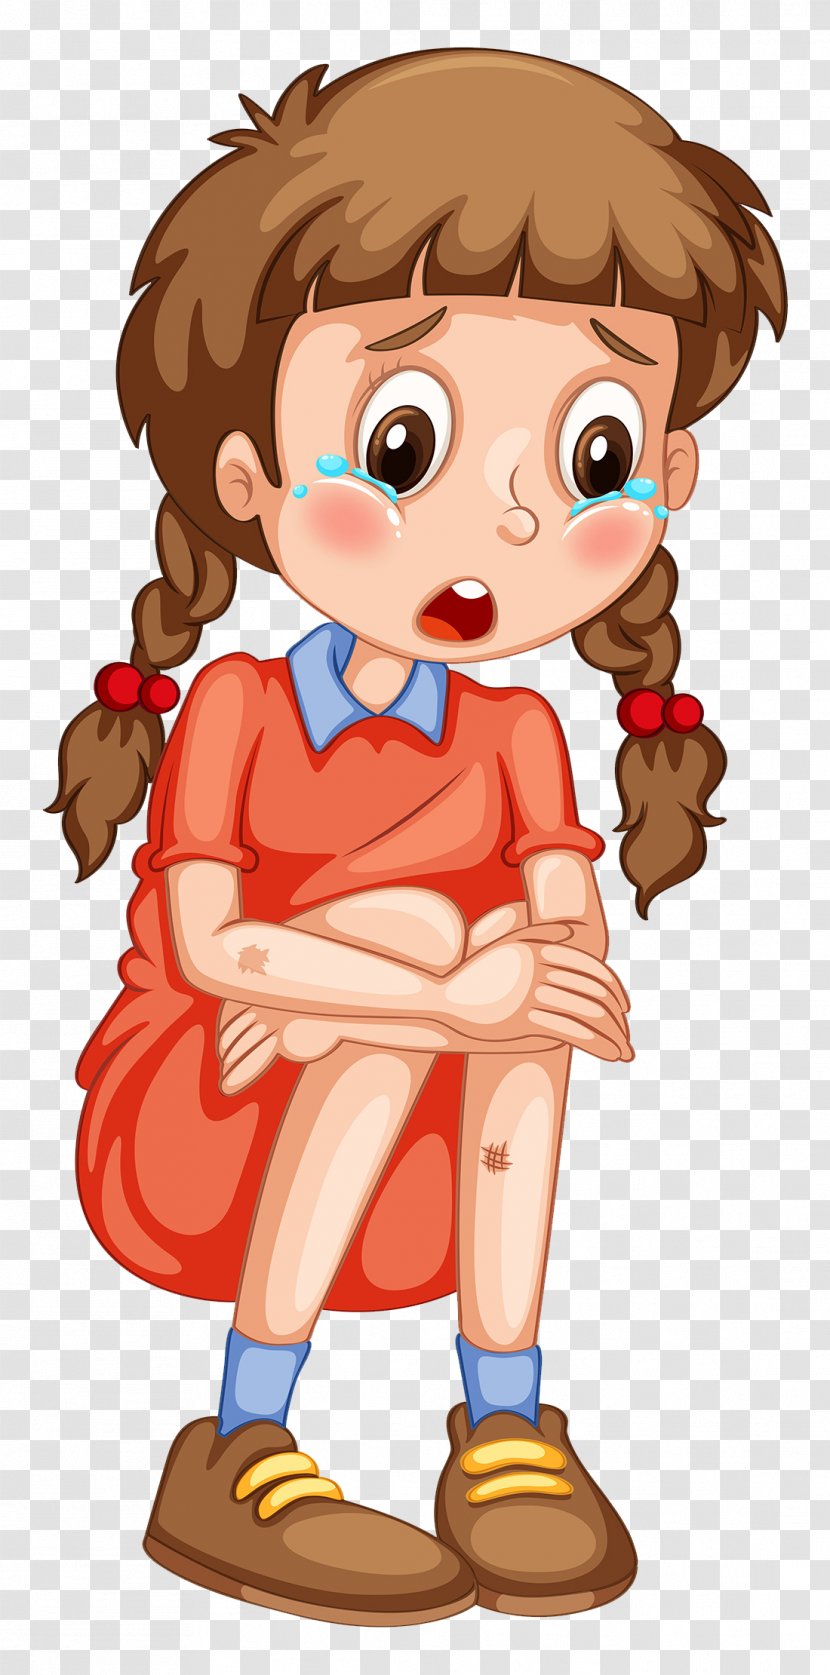 Cartoon Stock Photography Illustration - Frame - The Child Is Crying Transparent PNG